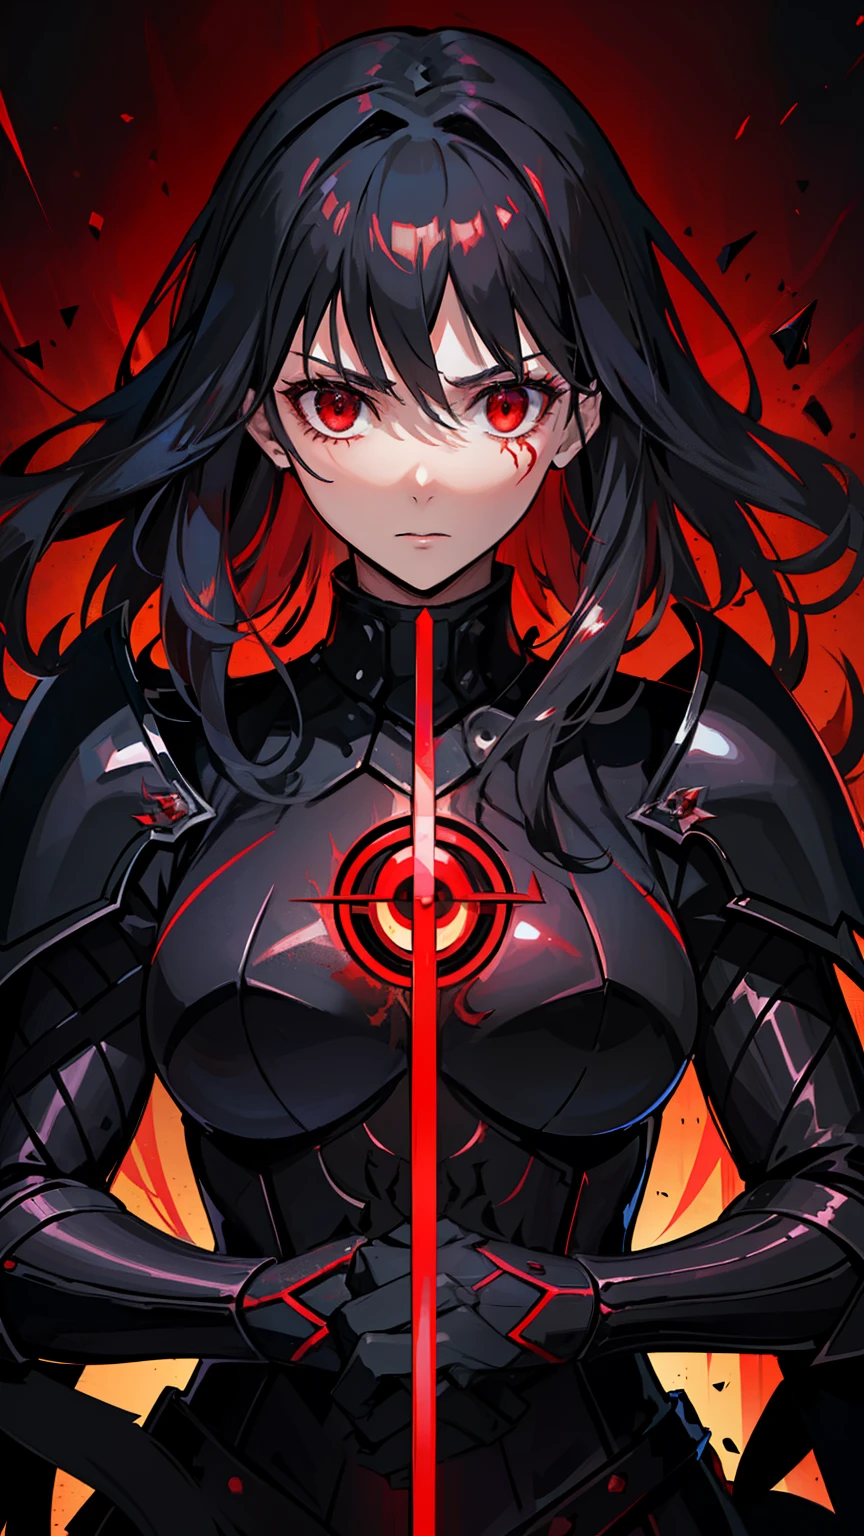 (high-quality, breathtaking),(expressive eyes, perfect face) 1female, girl , solo, young adult, long hair length, wavy curly hair, soft wave, black hair color, red highlights in hair, deep red eye color, background, music, serious confident expression, mature, dominant, haunting red background, armor, onyx black armor with red trim, midnight dark armor with red cracks engraved in the exterior, saber alter, alter saber fate stay night, corrupted theme, corrupted armor, red lines on armor, conquerer vibe, red markings on armor, slightly narrow eyes, evil queen, narrow beautiful eyes
